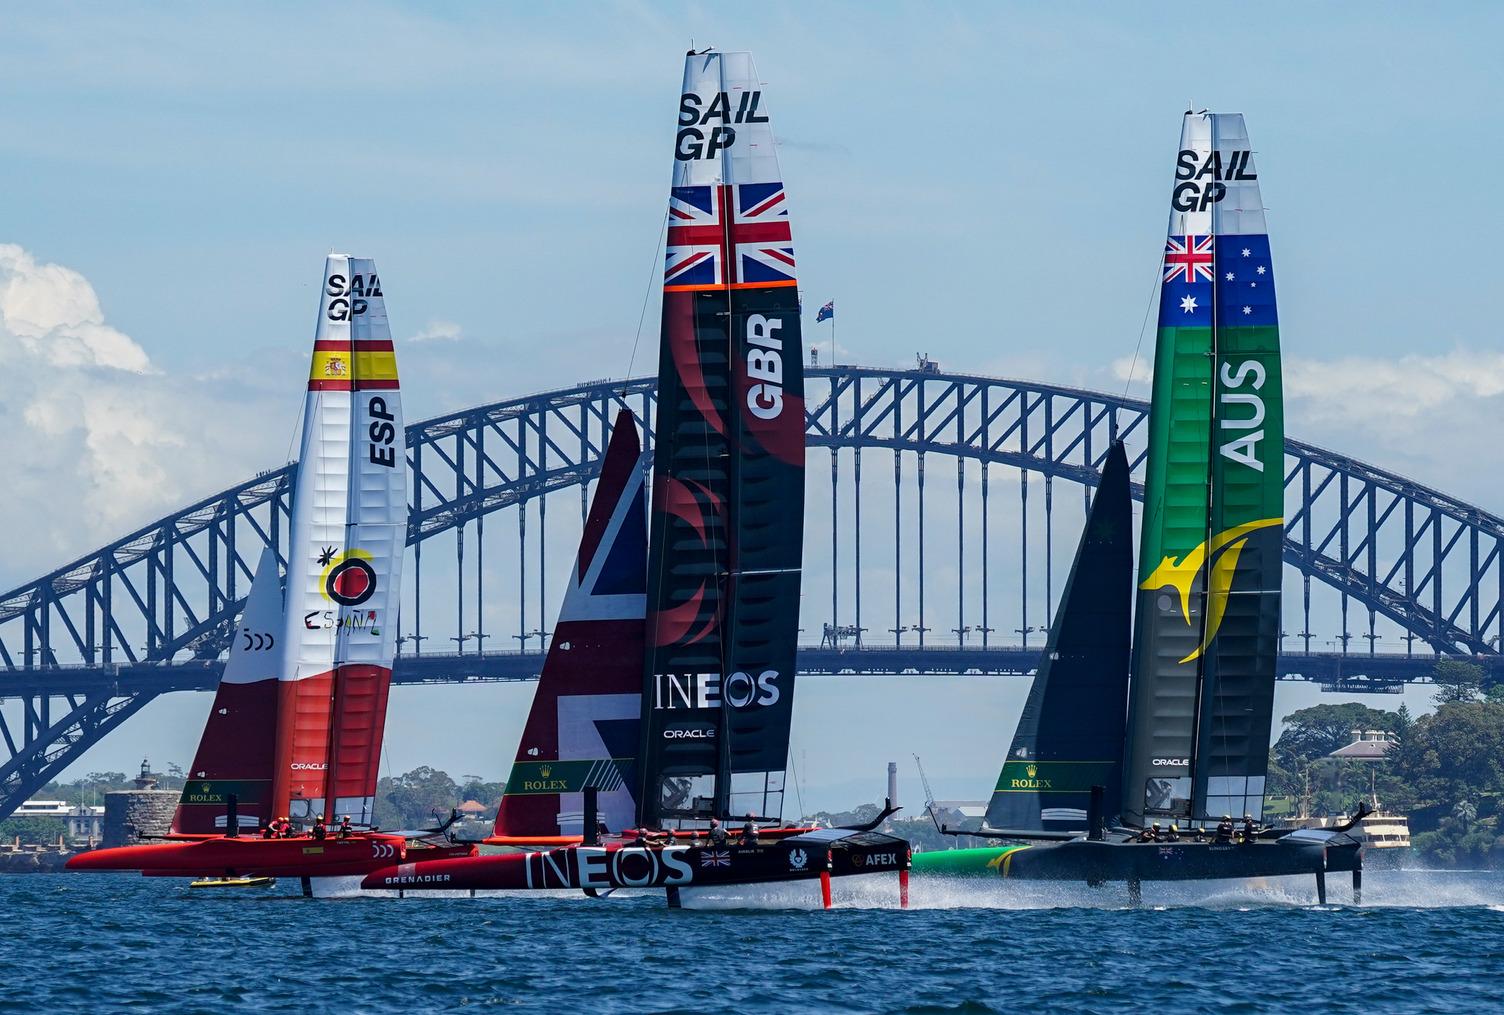 The SailGP fleet recently selected Doyle as its sailmaker of choice, marking another significant step forward in Doyle Sails’ steady rise to international prominence